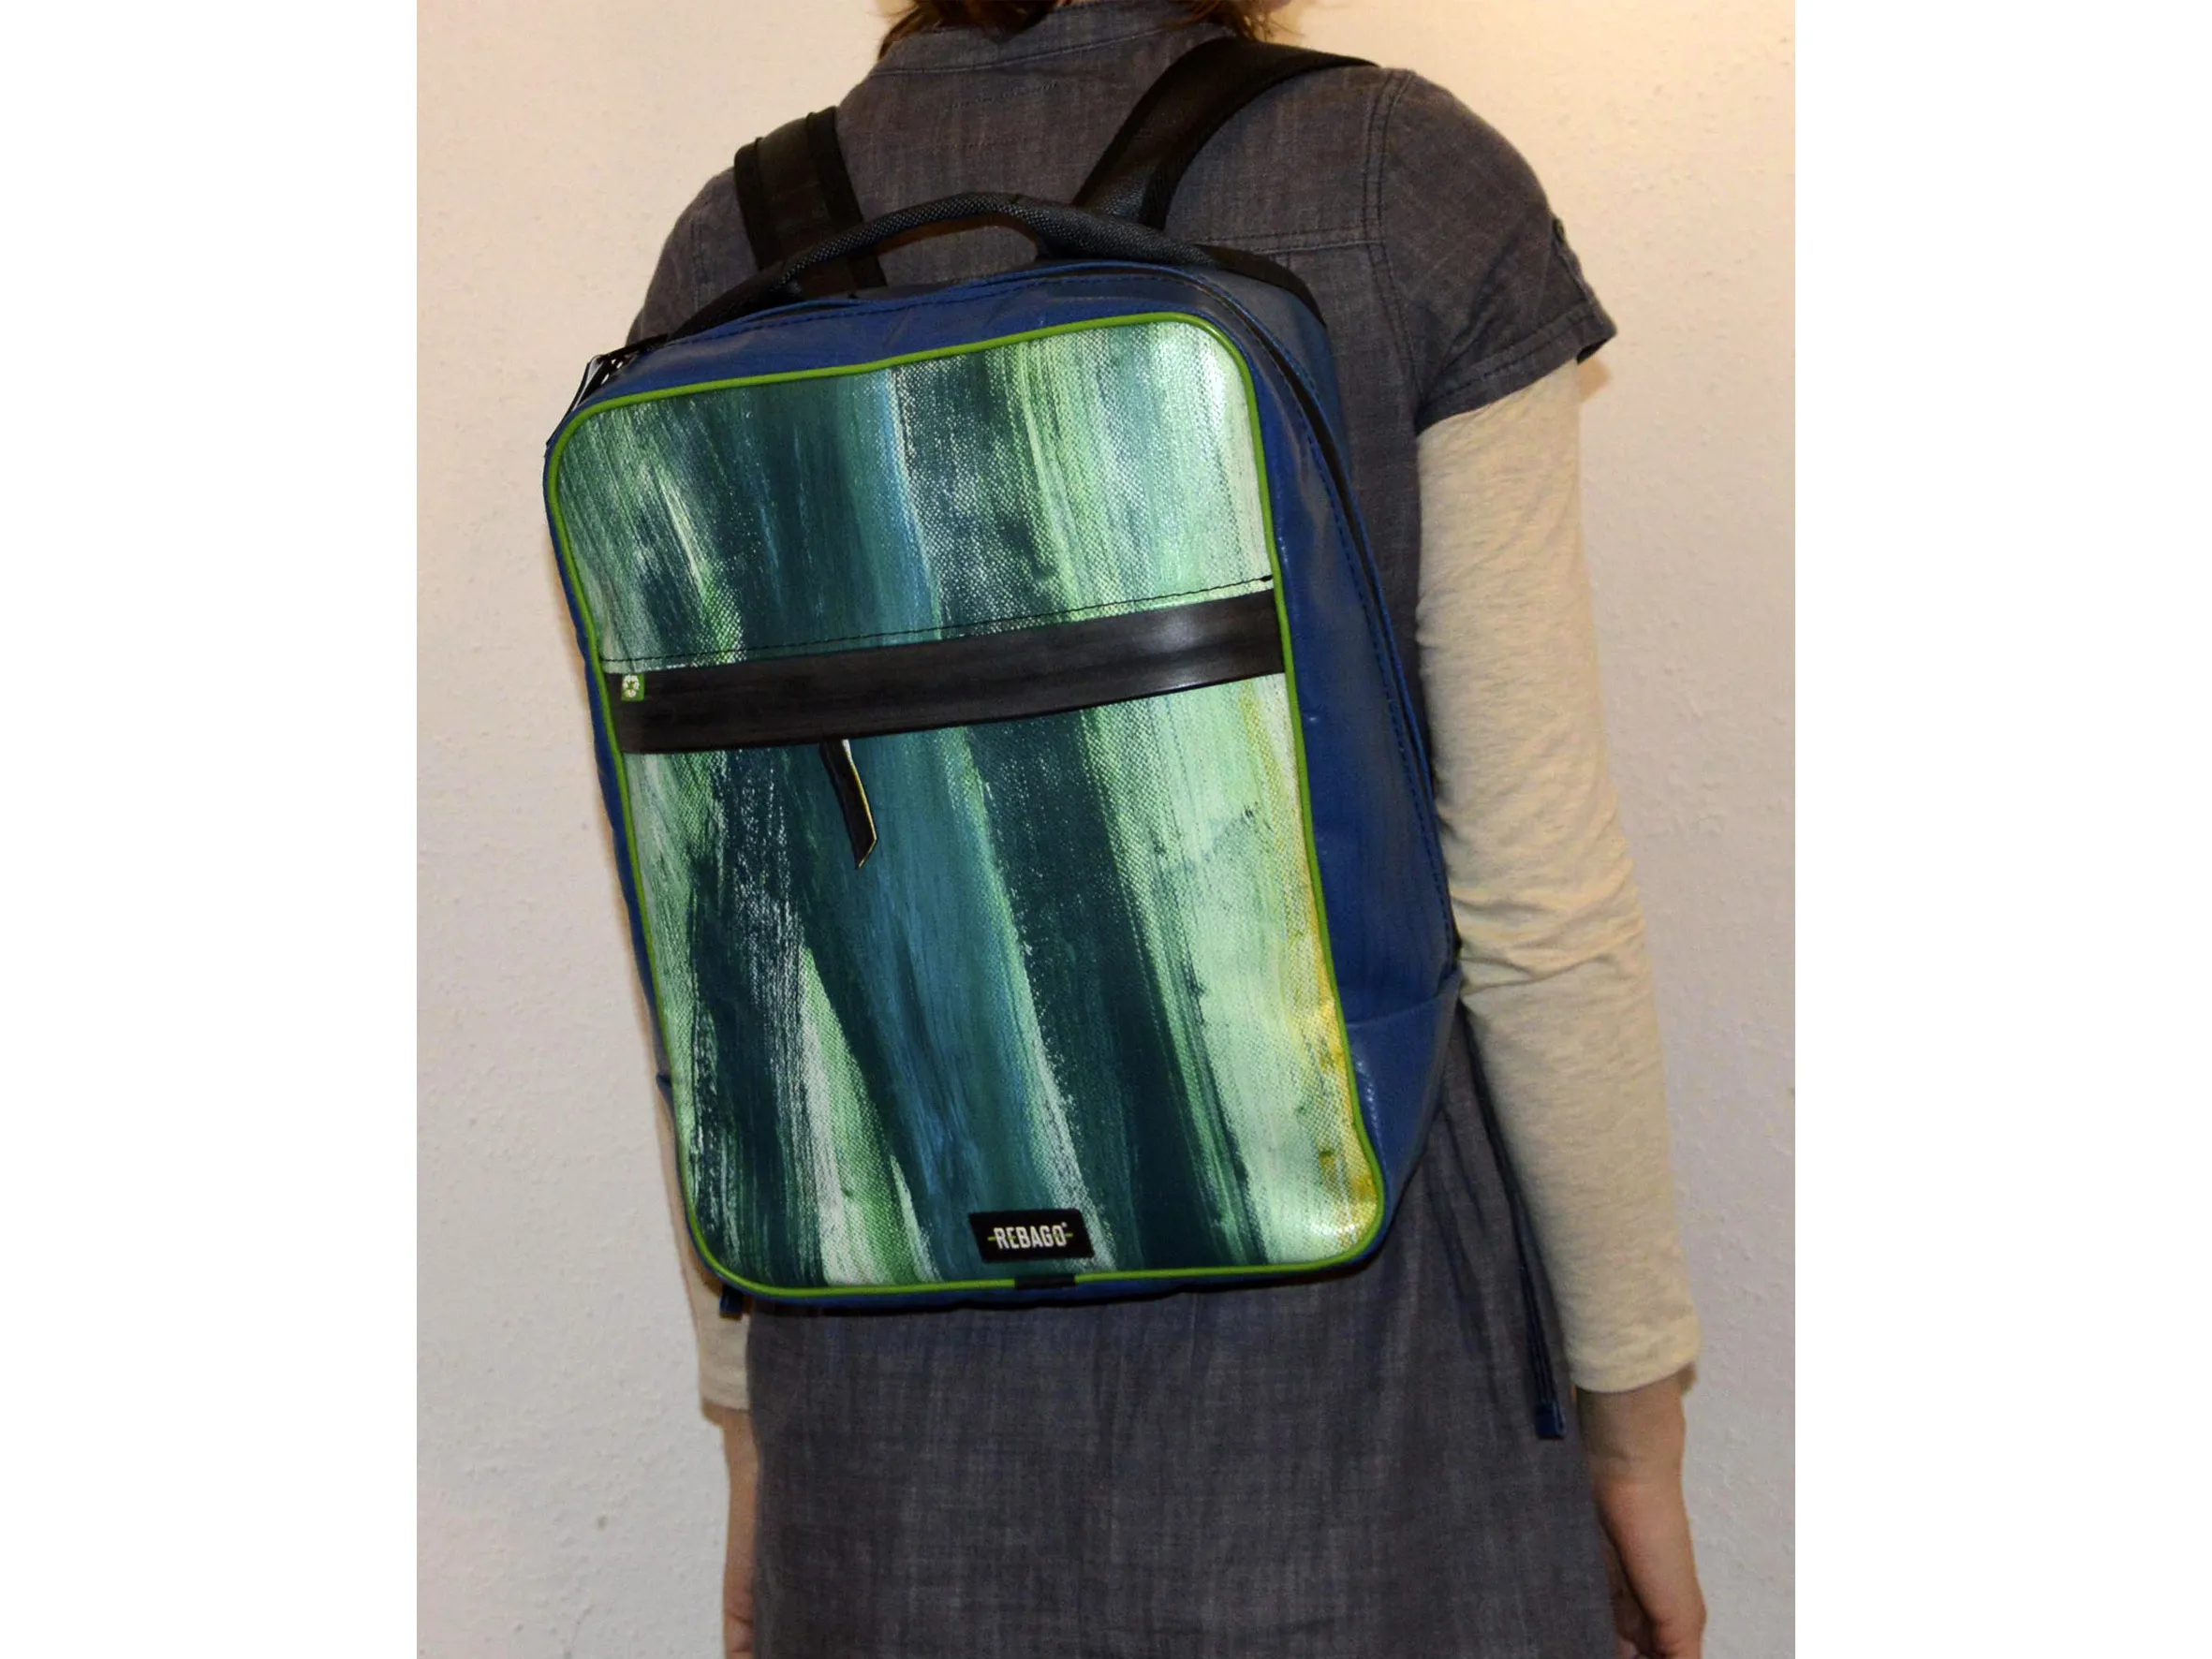 BOB-upcycled-backpack-one-of-a-kind-recycled-upcycling-bags-2-Rebago